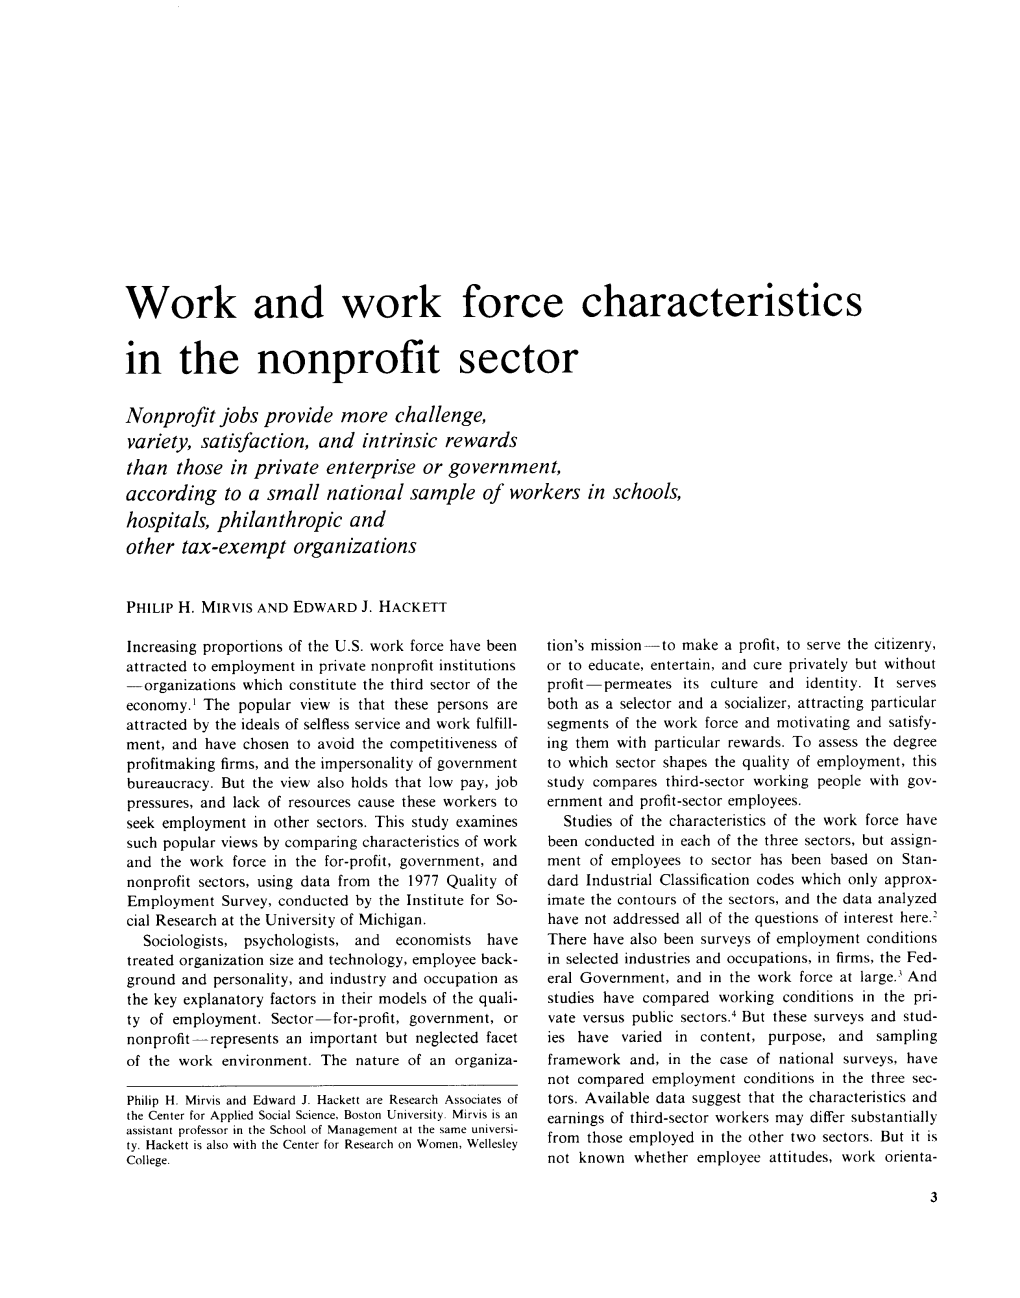 Work and Work Force Characteristics in the Nonprofit Sector